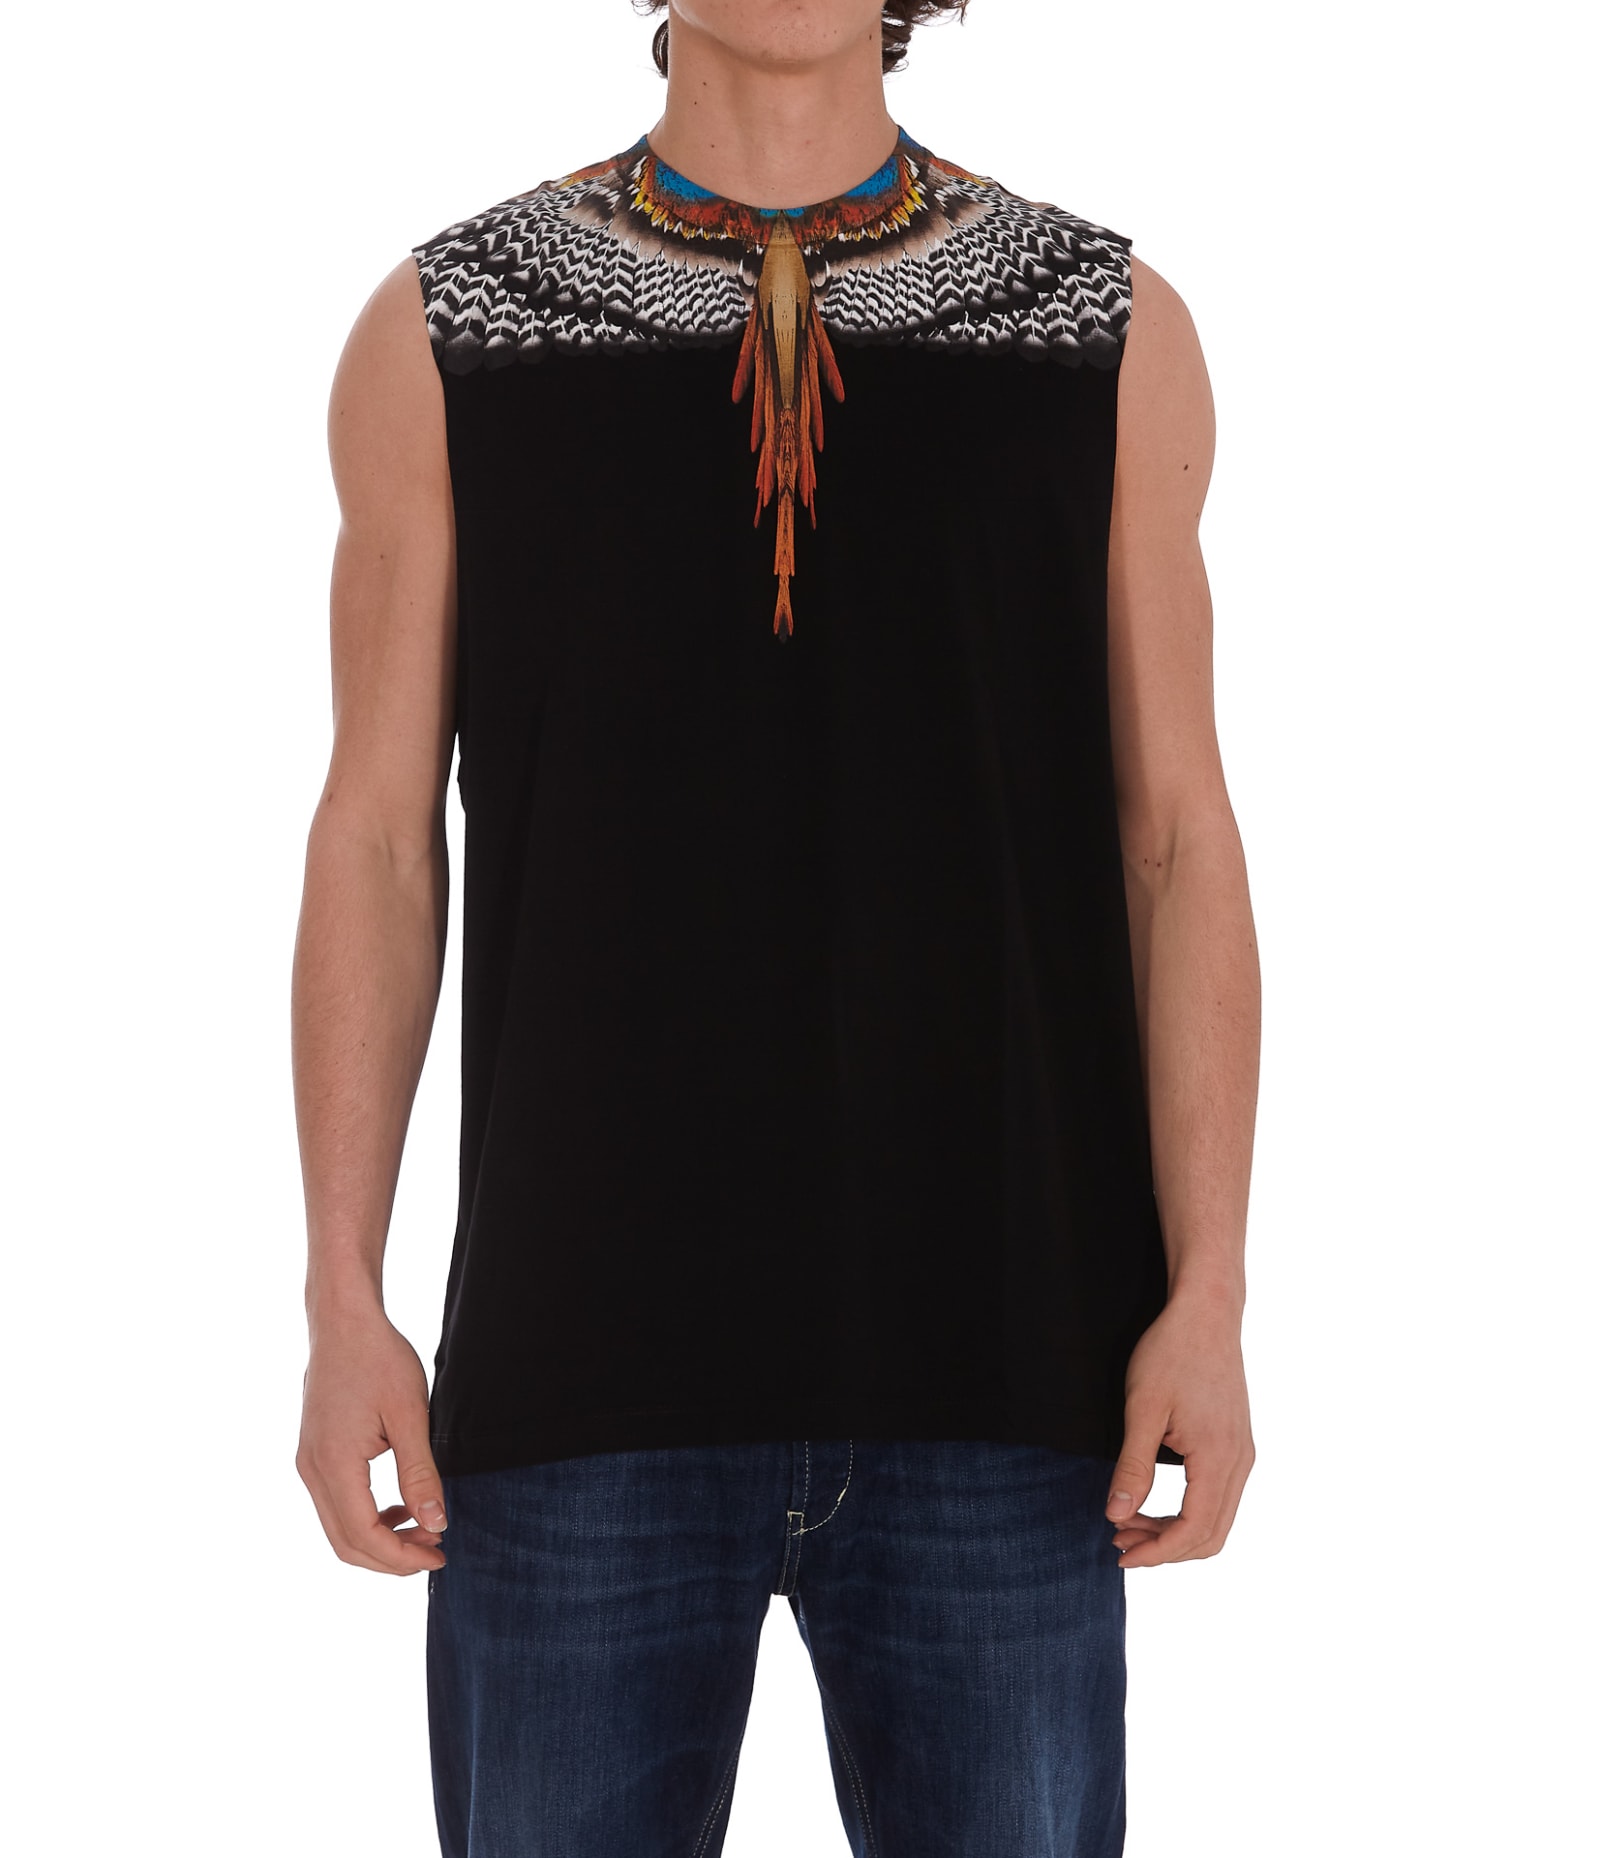 MARCELO BURLON COUNTY OF MILAN GLIZZLY WINGS T-SHIRT,CMAC021S21JER001 1020